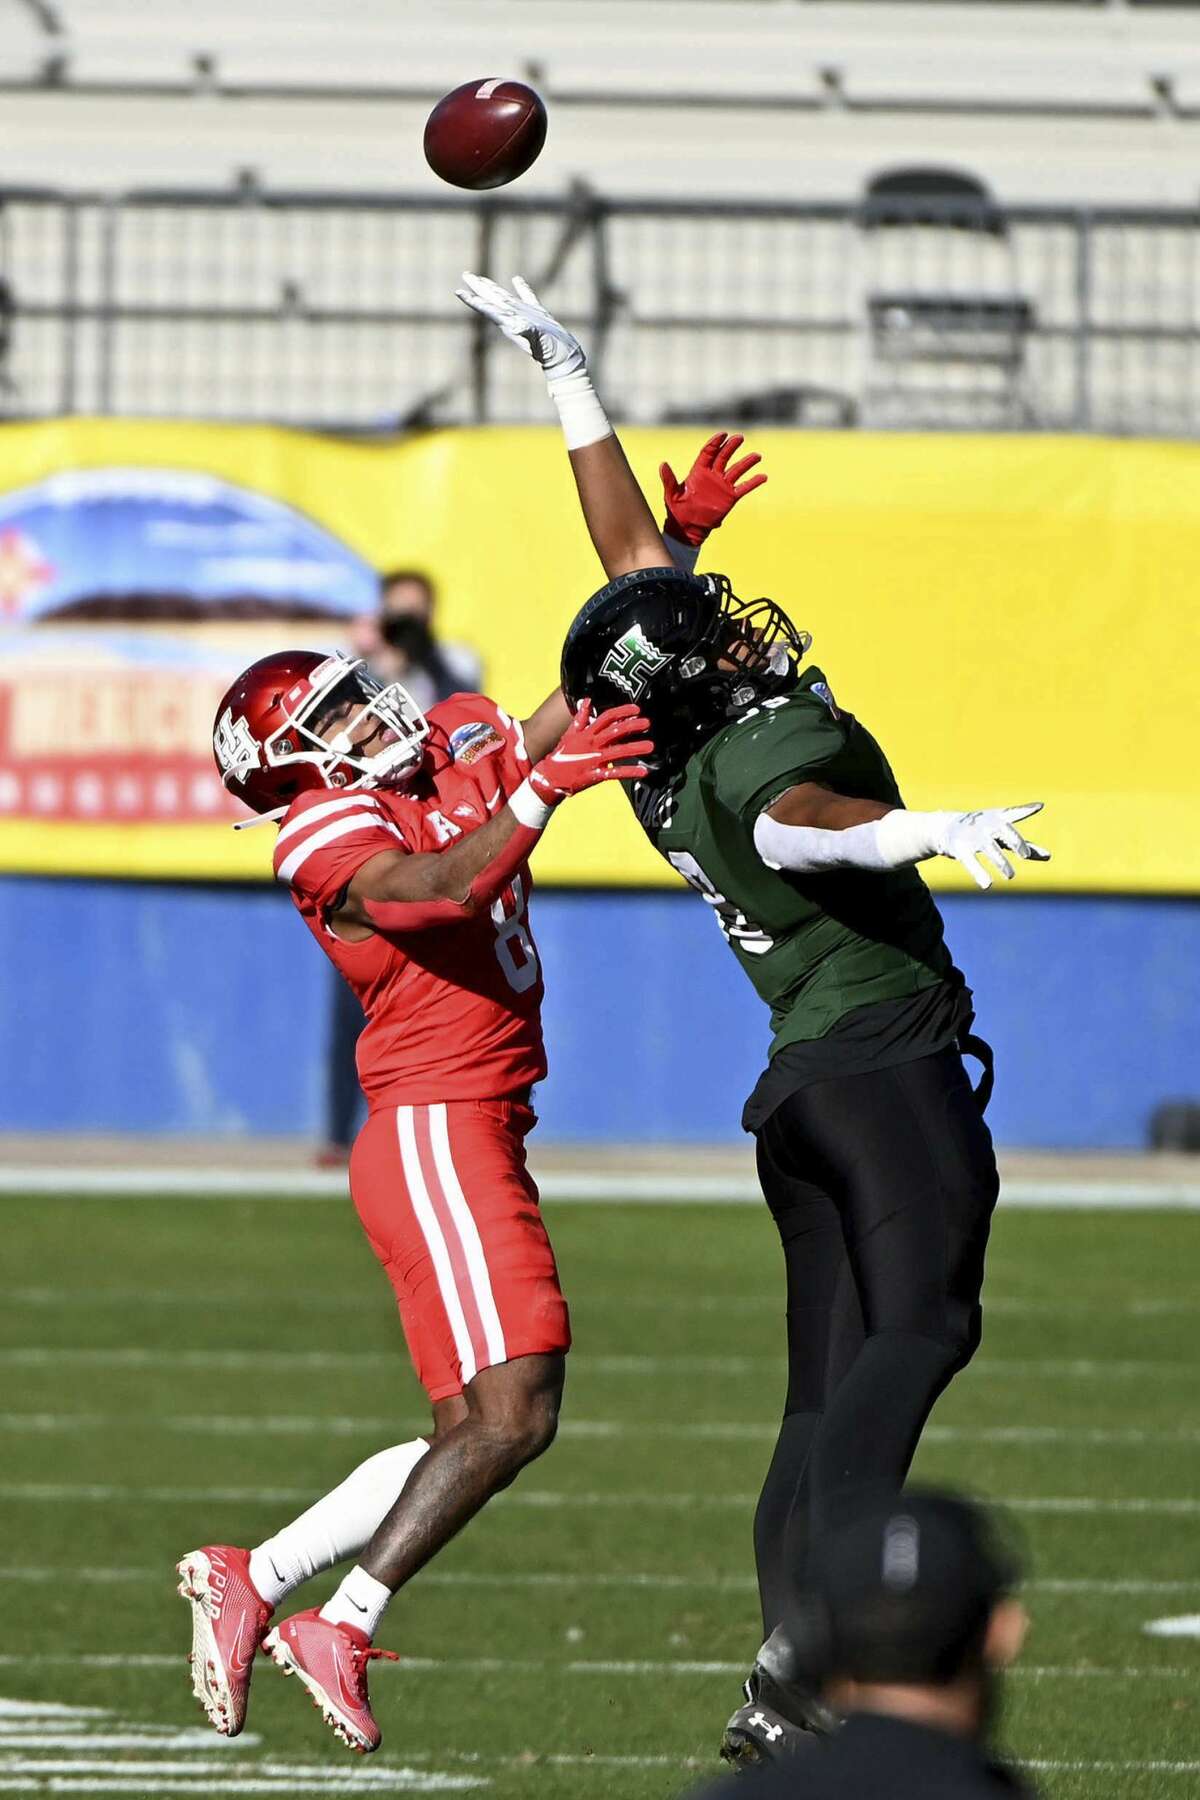 Hawaii Jonah Laulu (99) can't make a catch while defended by Houston cornerback Marcus Jones (8) in the first quarter of the New Mexico Bowl NCAA college football game in Frisco, Texas, Thursday, Dec. 24, 2020. (AP Photo/Matt Strasen)